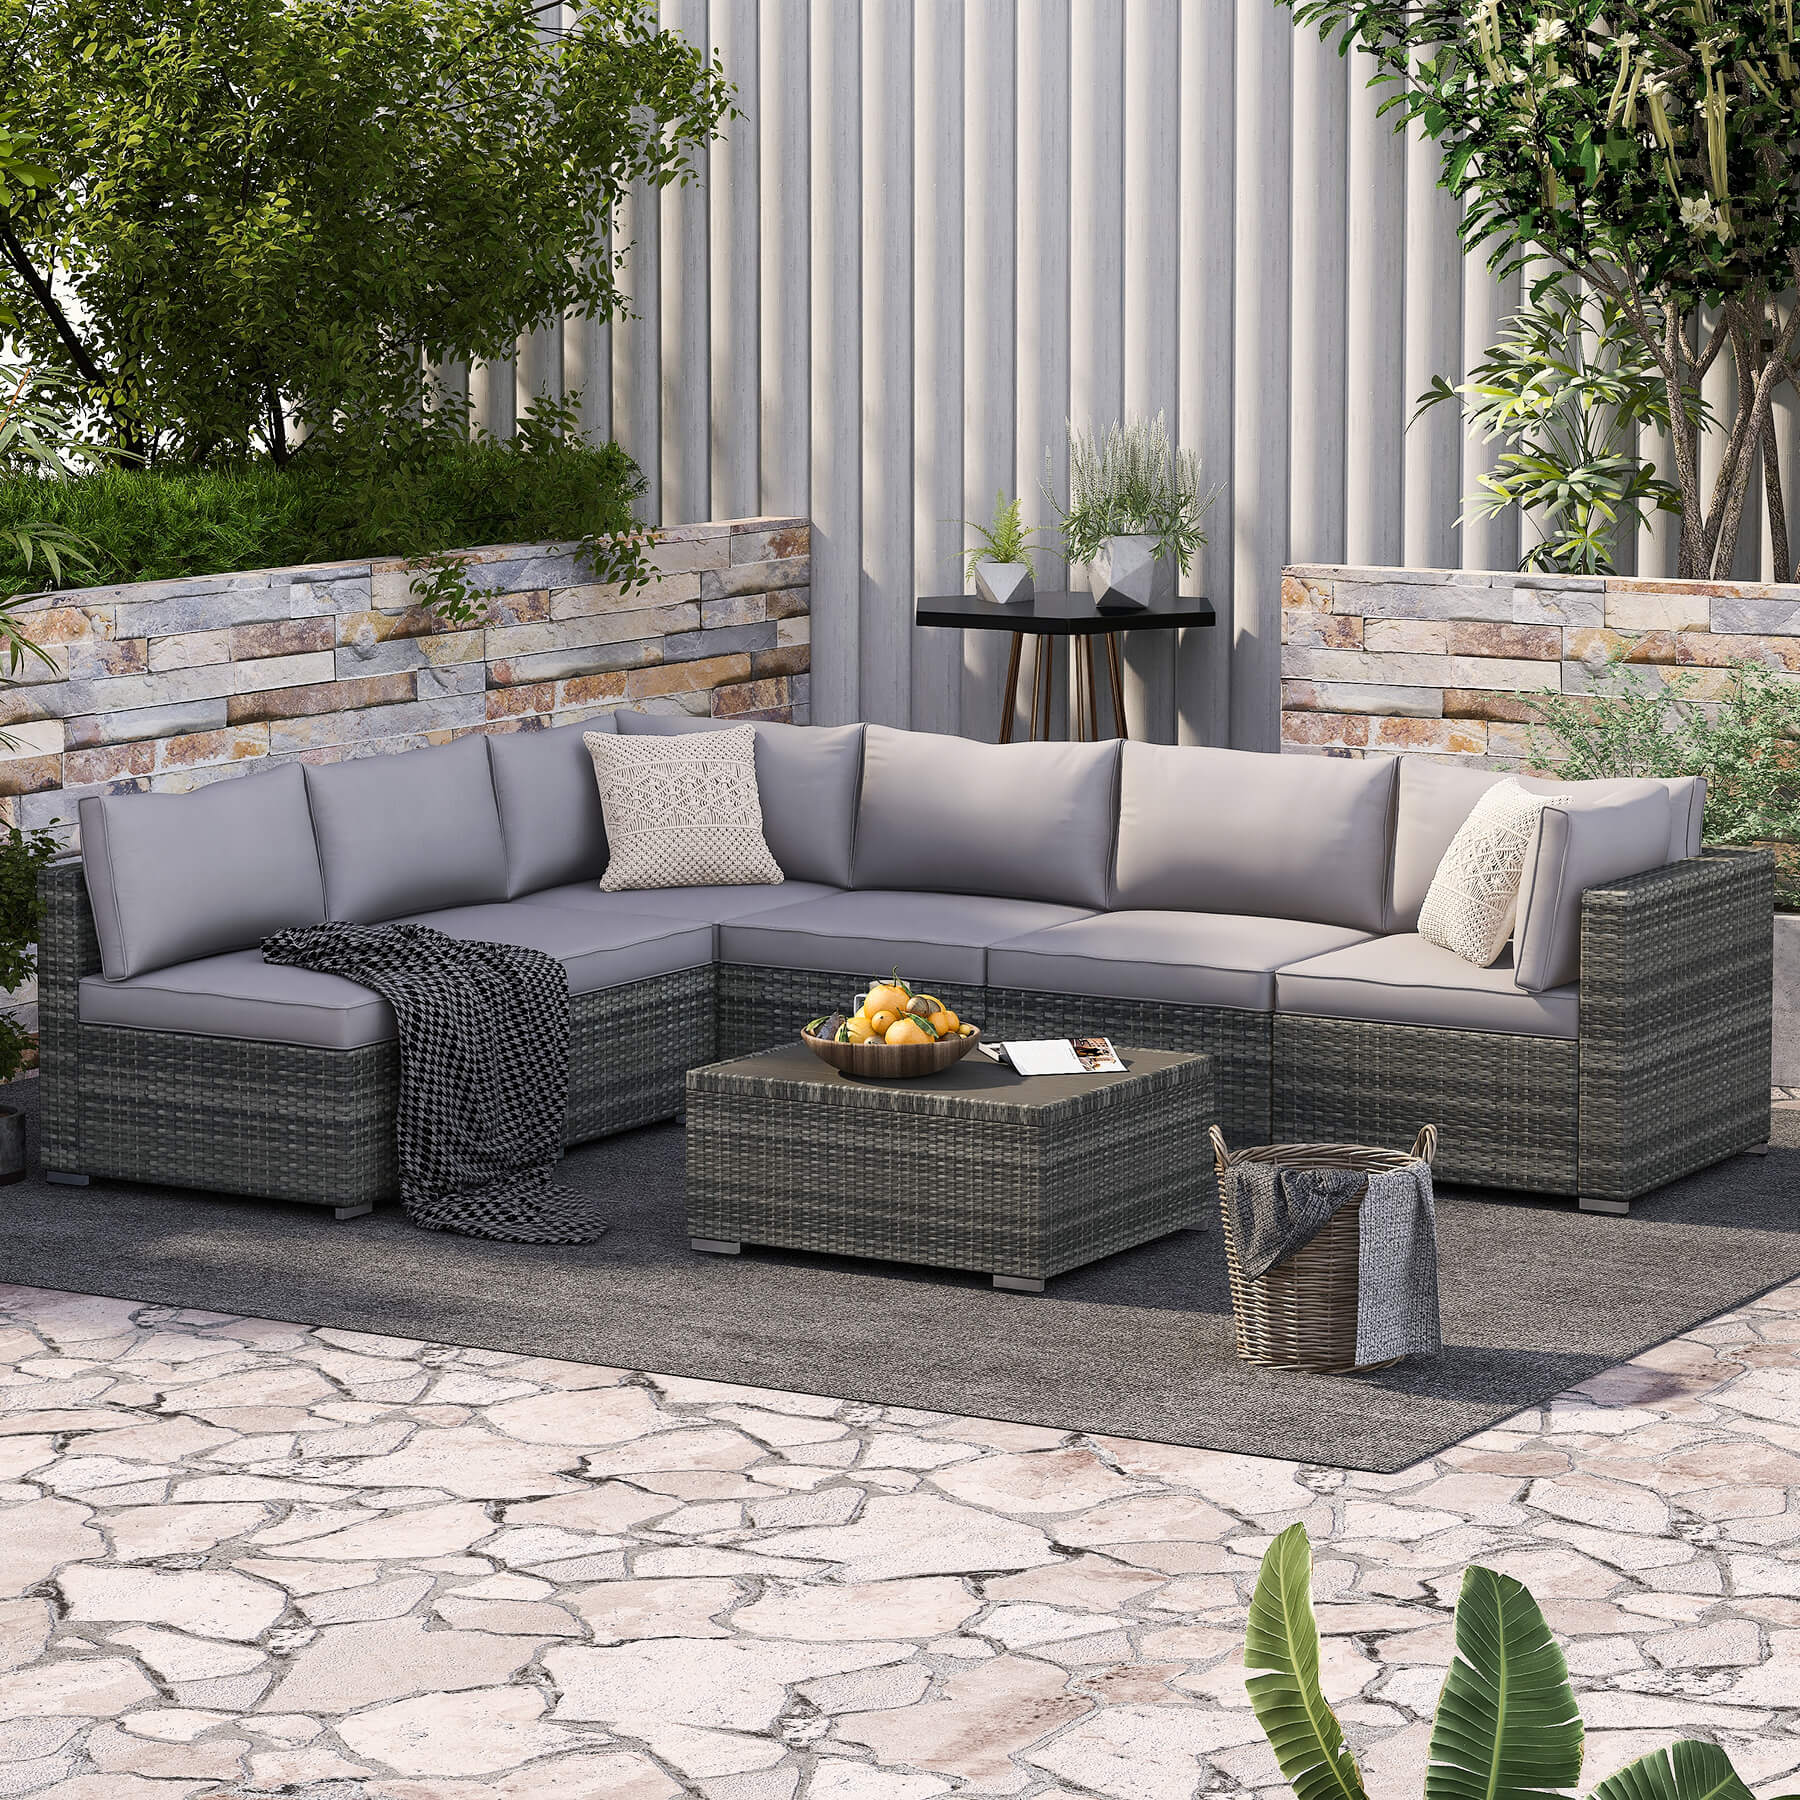 7-pcs-outdoor-rattan-sectional-sofa-w-adjustable-bracket-all-weather-patio-furniture-set-w-grey-cushion-coffee-table